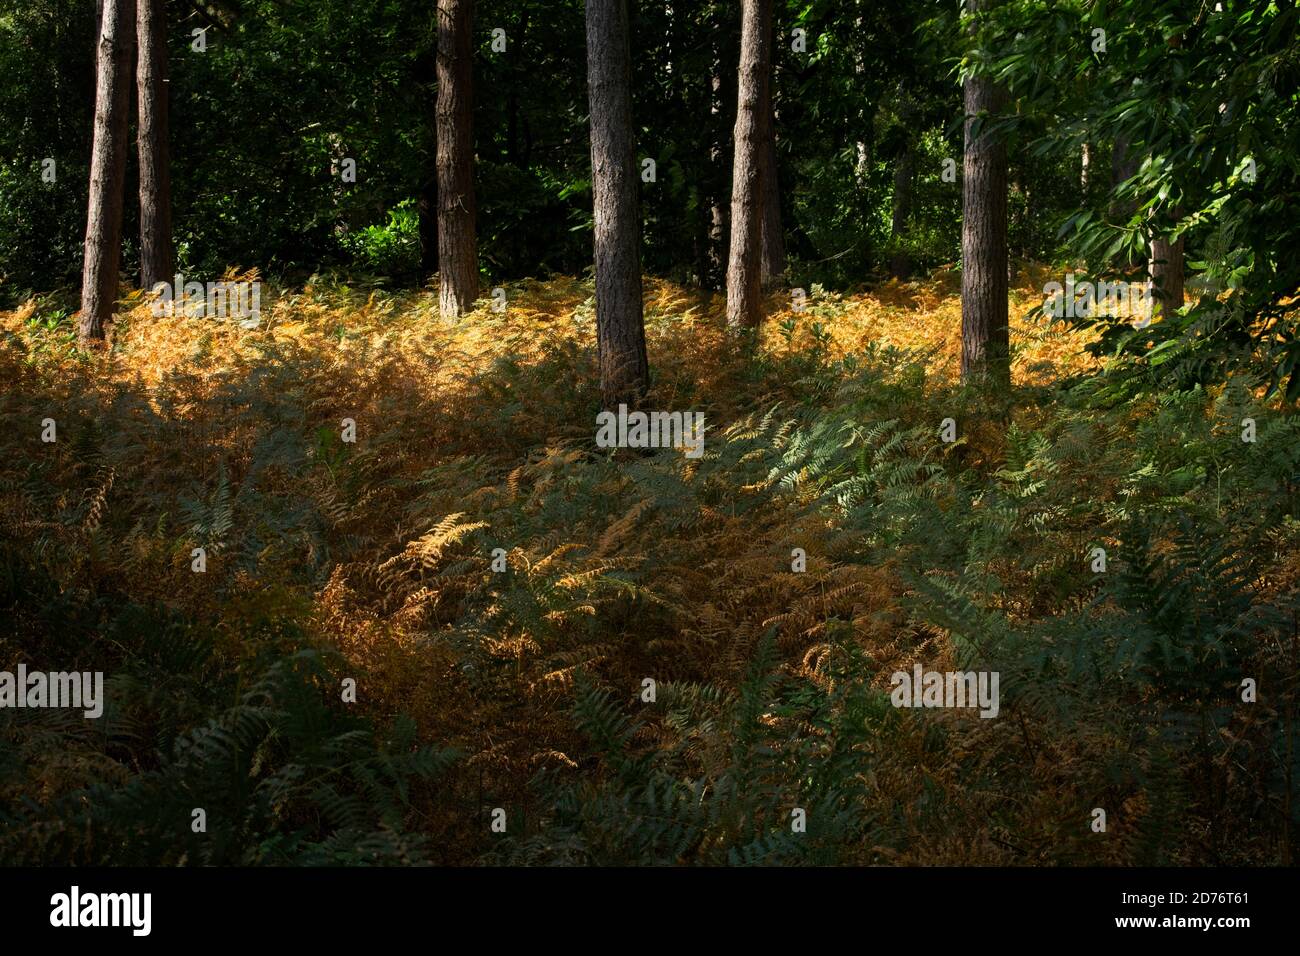 Autumnal woodland scene with trees and ferns lit by pocket of sunlight. Landscape format. Stock Photo